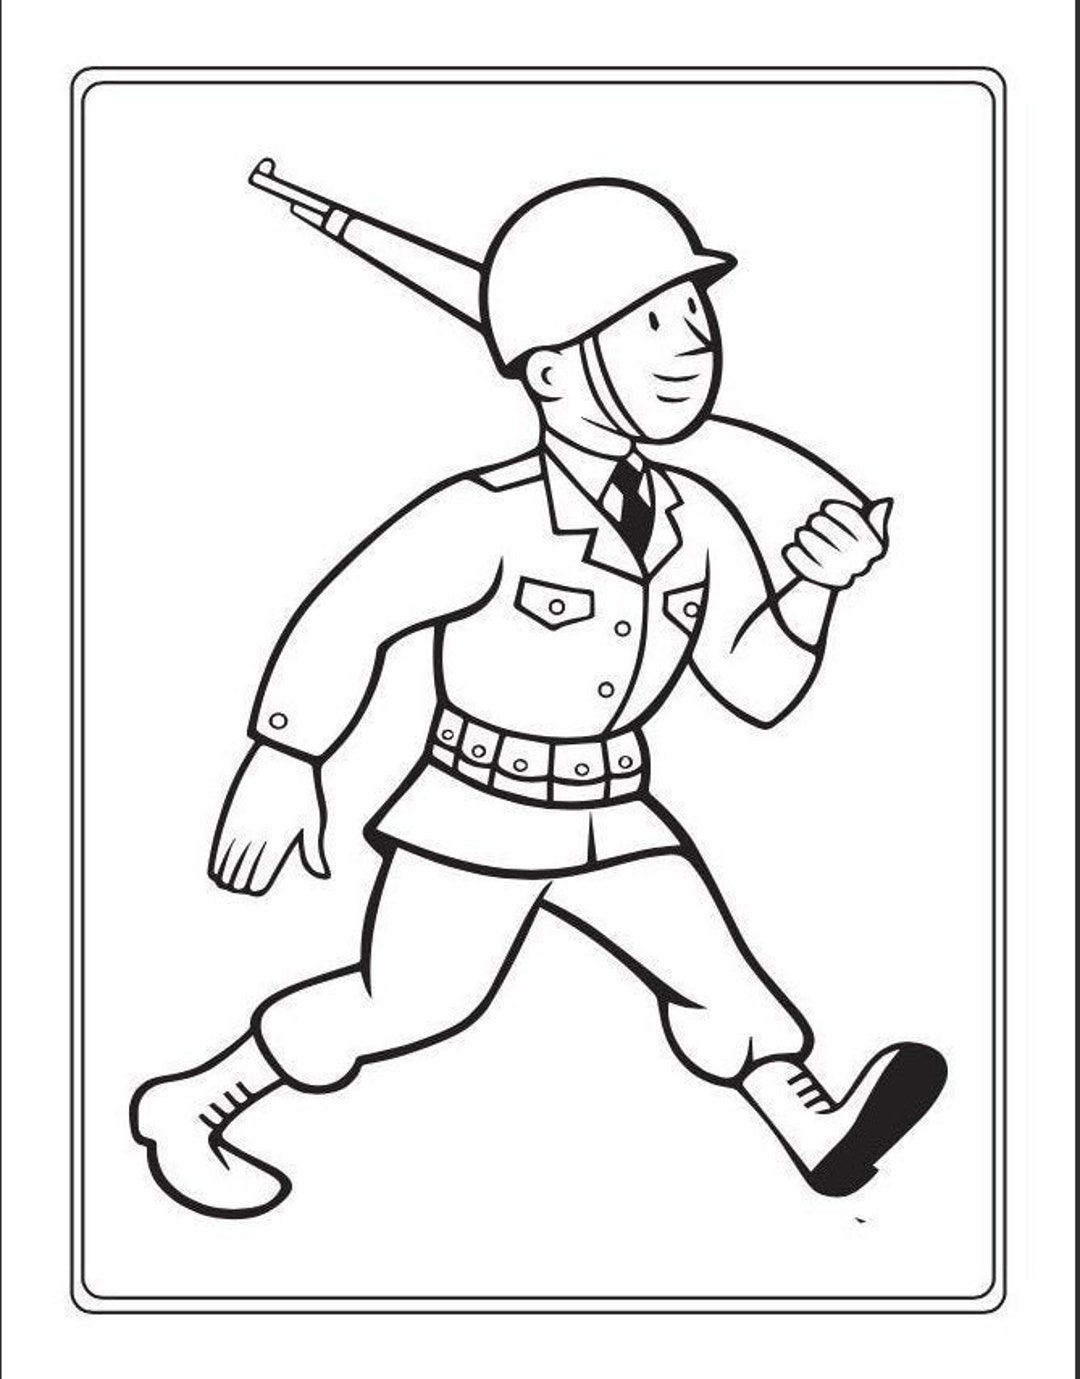 Army coloring pages for kids printable coloring pages for children boys and girls digital download